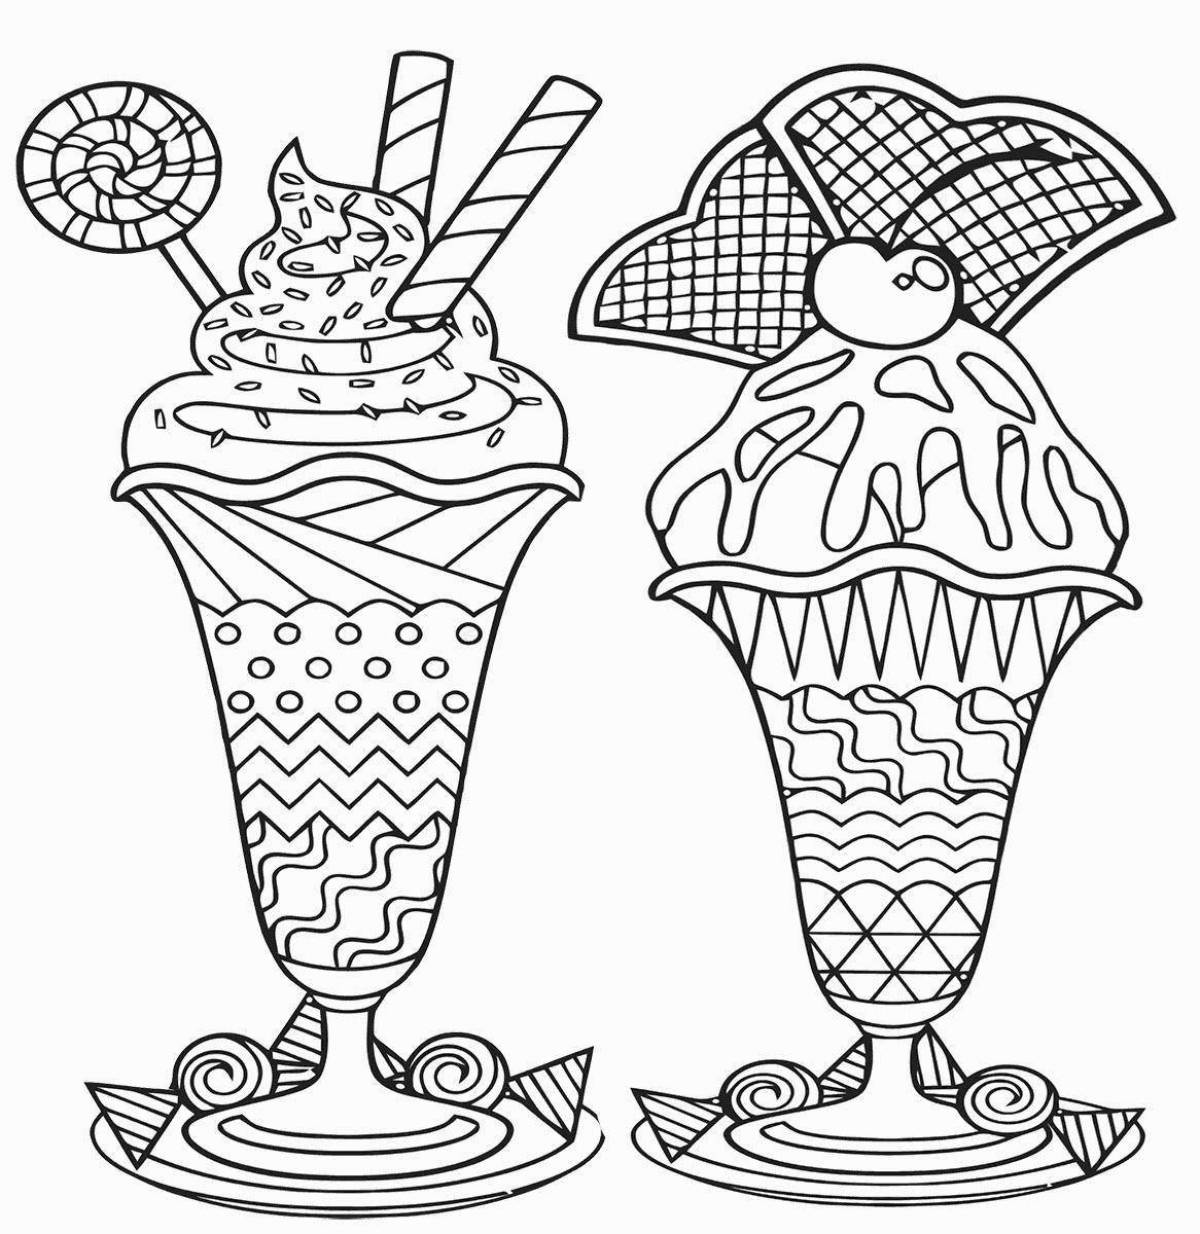 Playful antistress ice cream coloring page